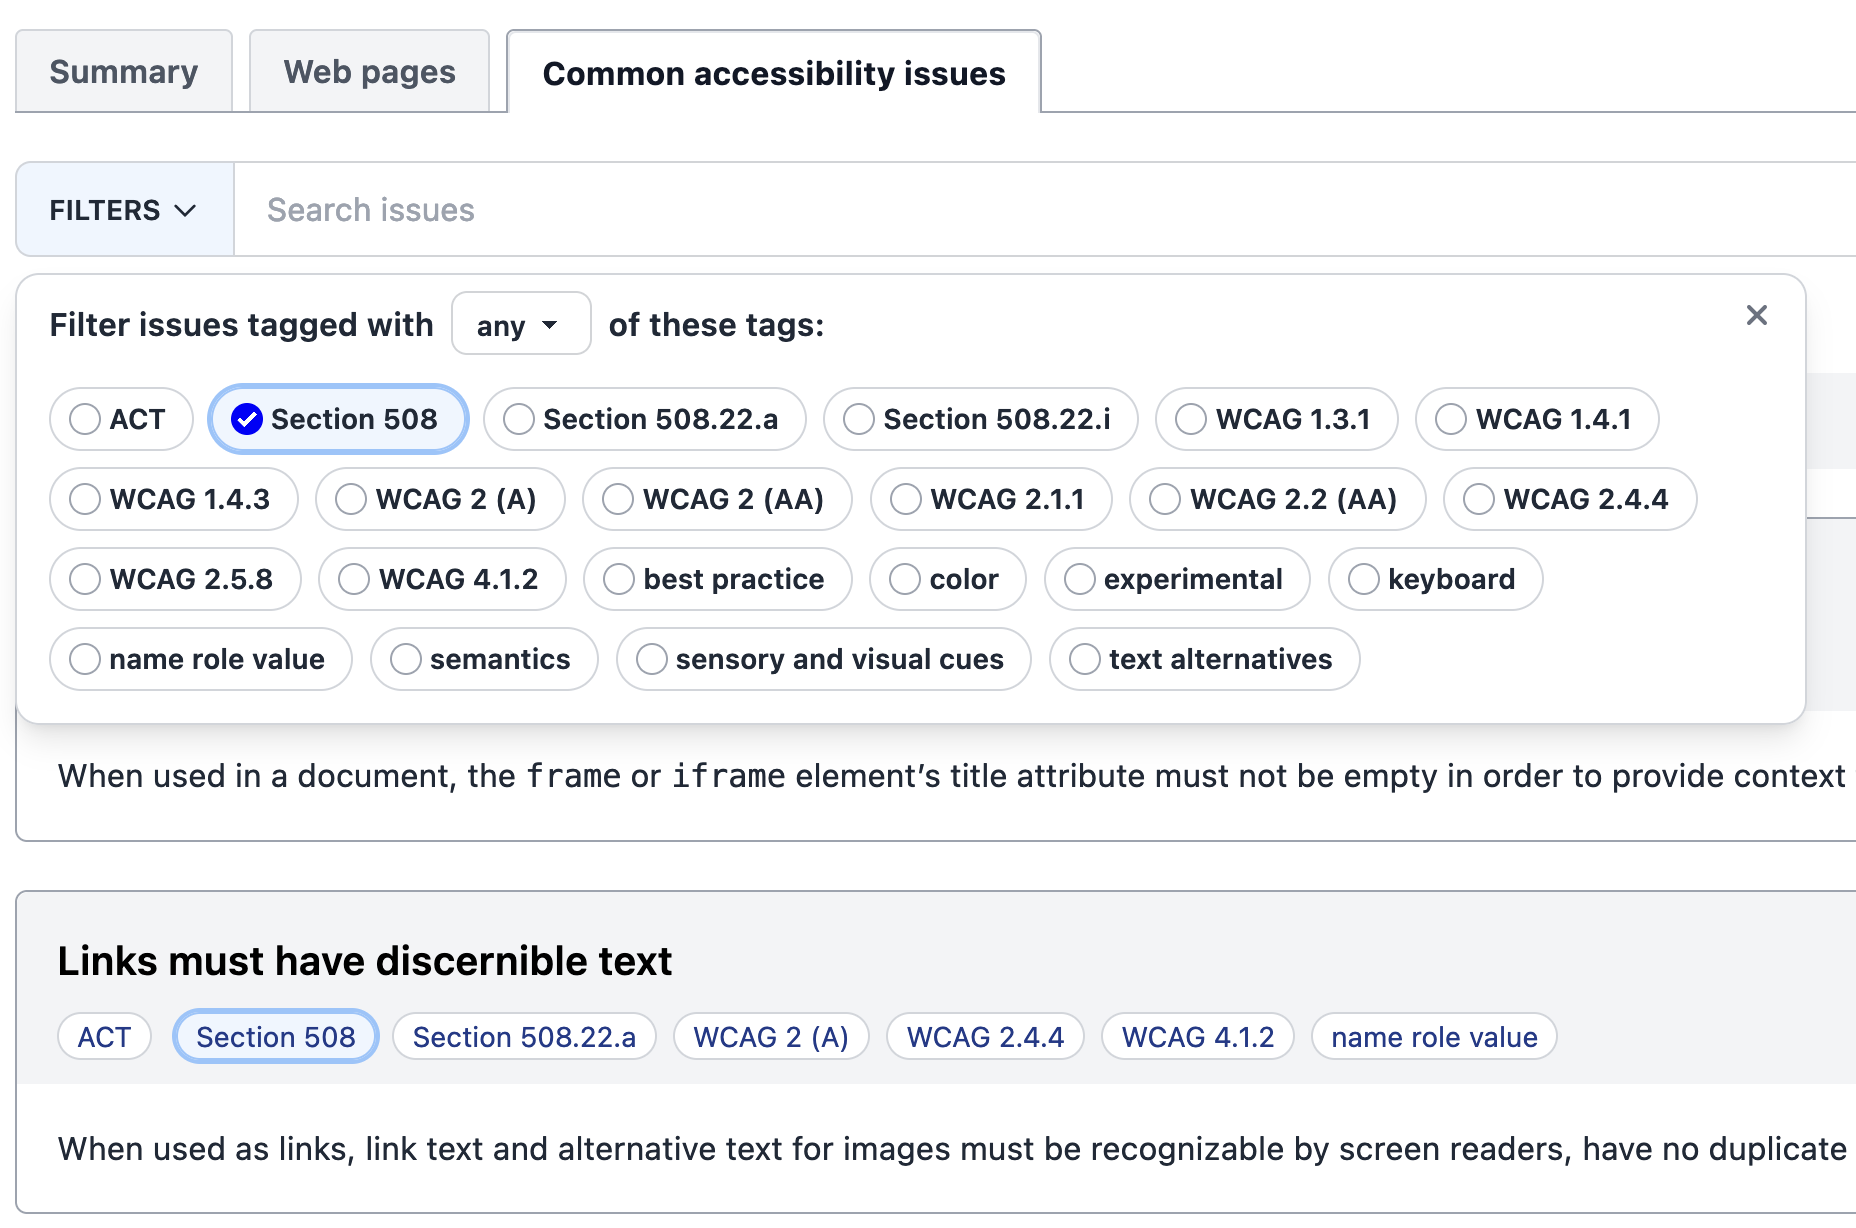 Filtering accessibility issues by tag